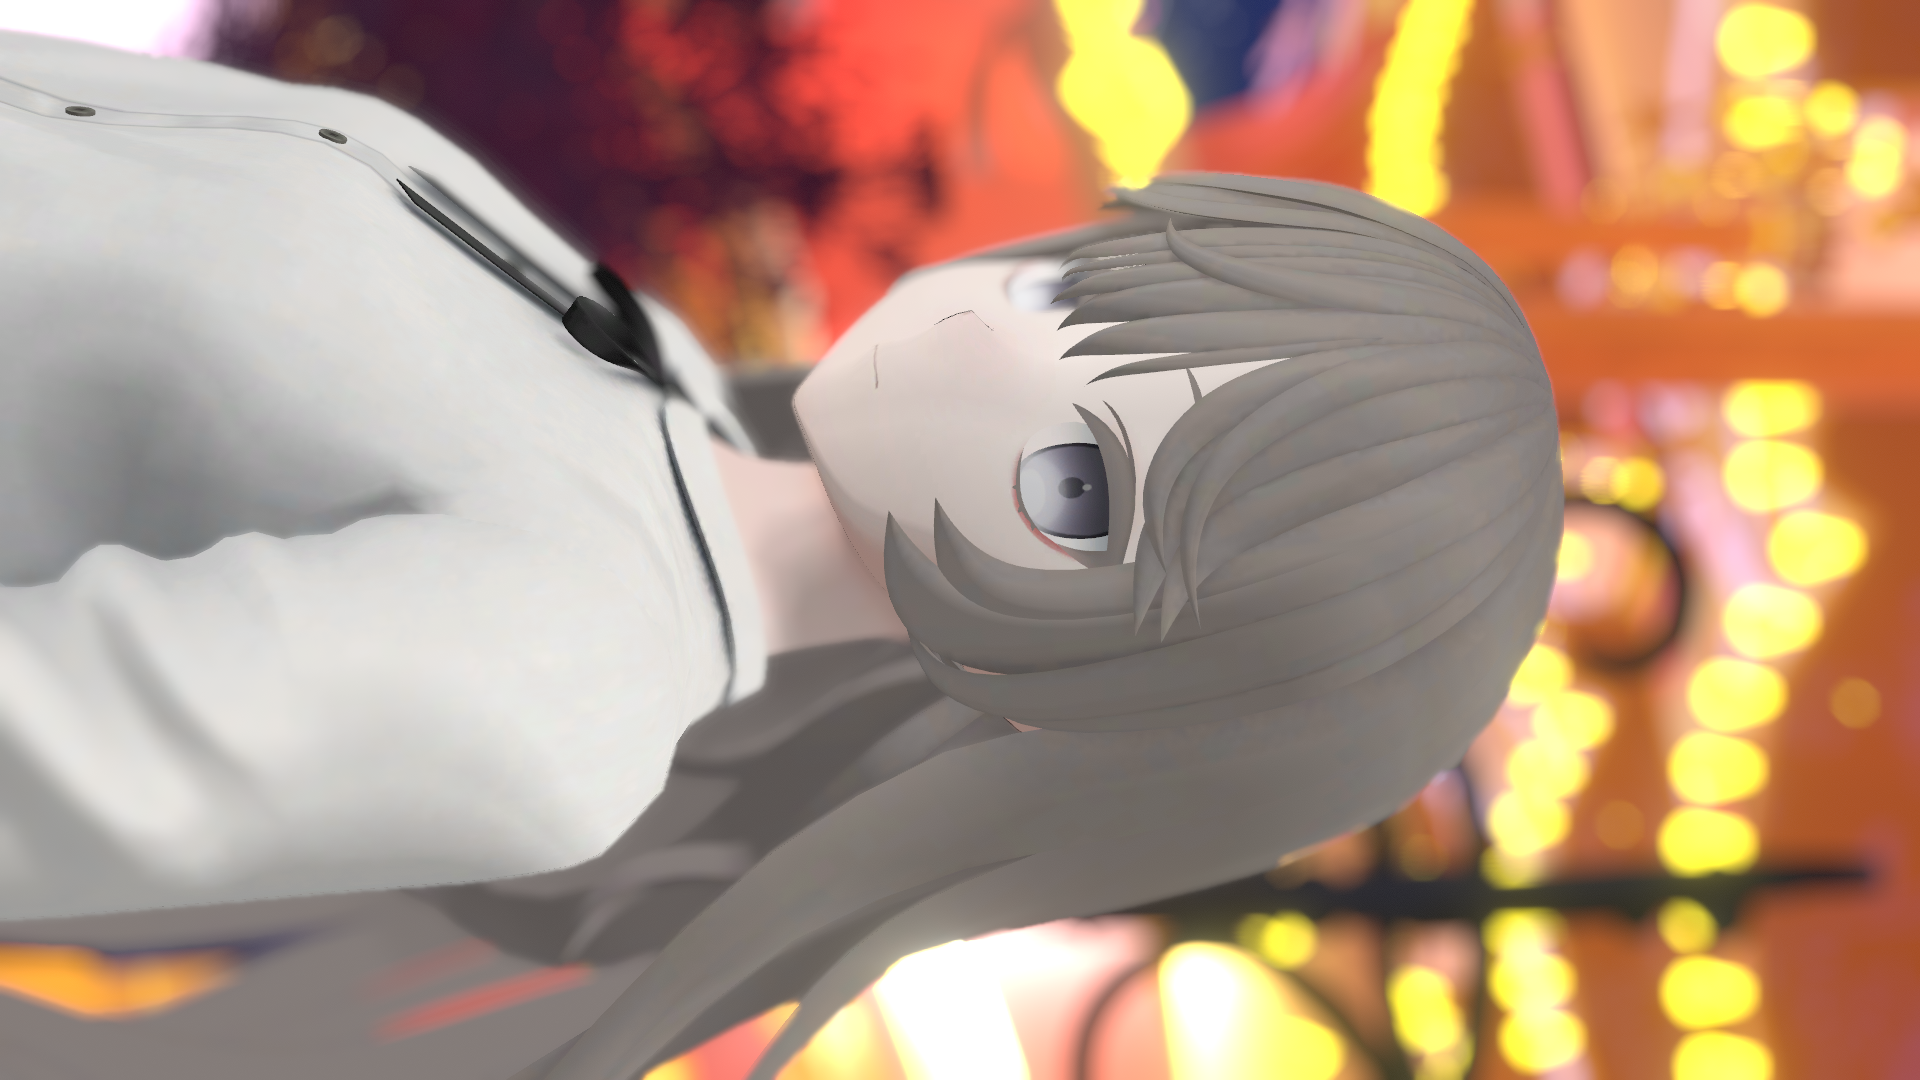 VRChat_1920x1080_2021-12-05_05-10-52.704.png